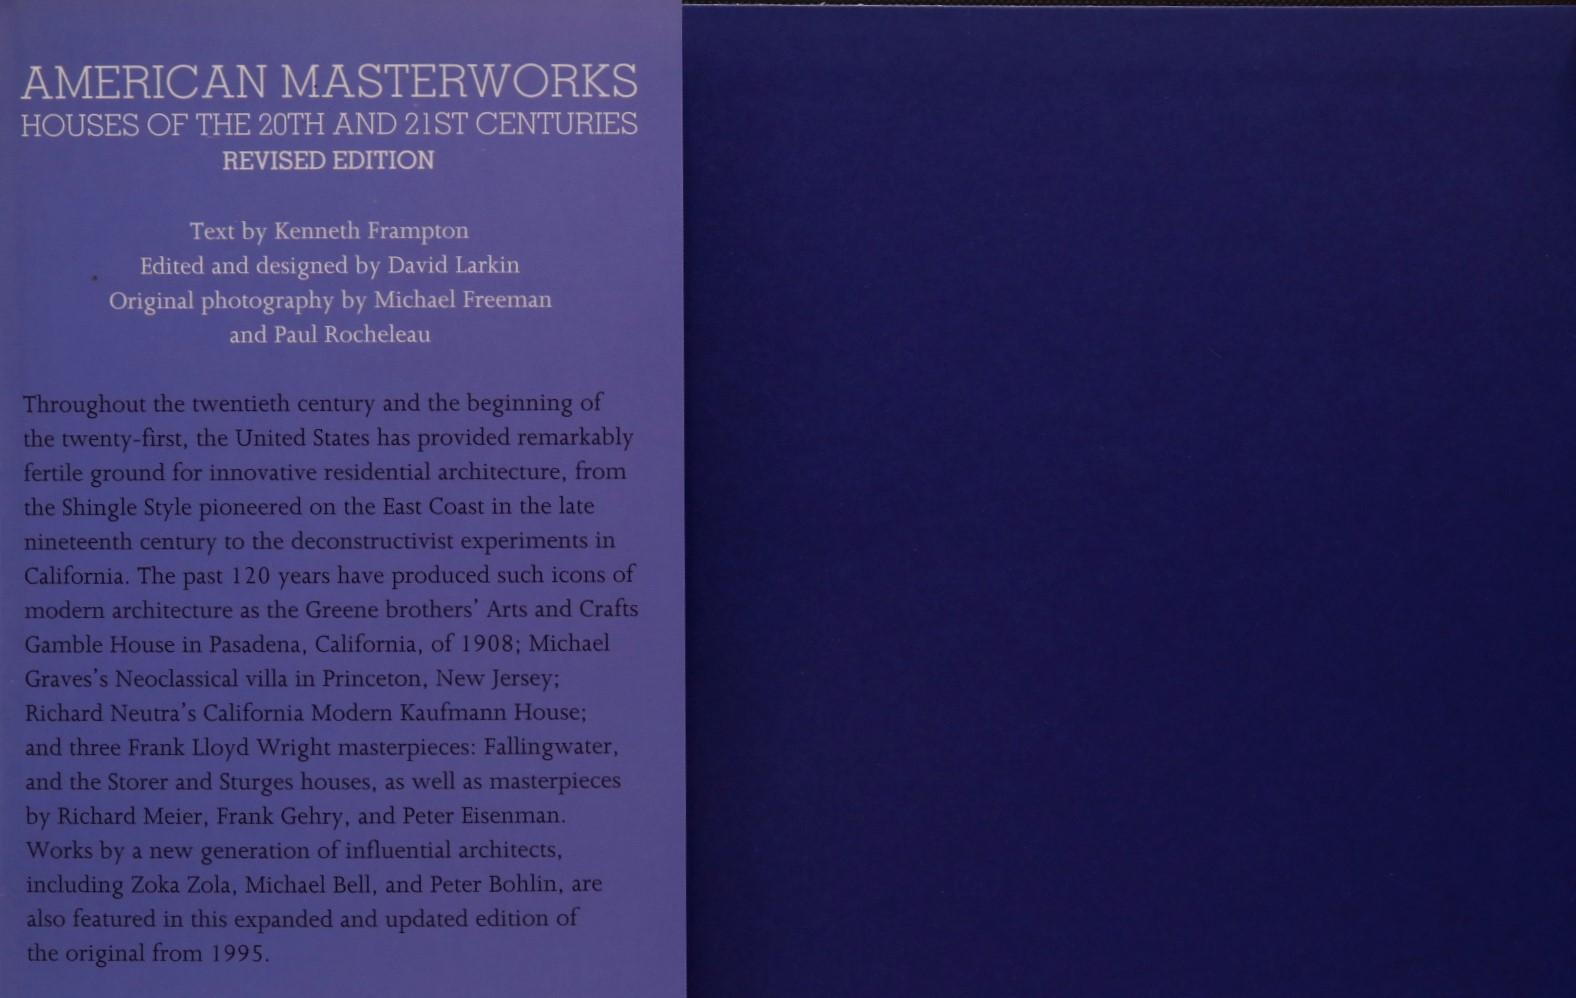 American Masterworks, Houses of the 20th and 21st Centuries by Kenneth Frampton and David Larkin. Printed in 2008 by Rizzoli of New York. Hardcover with dust jacket, 383 pages.
 